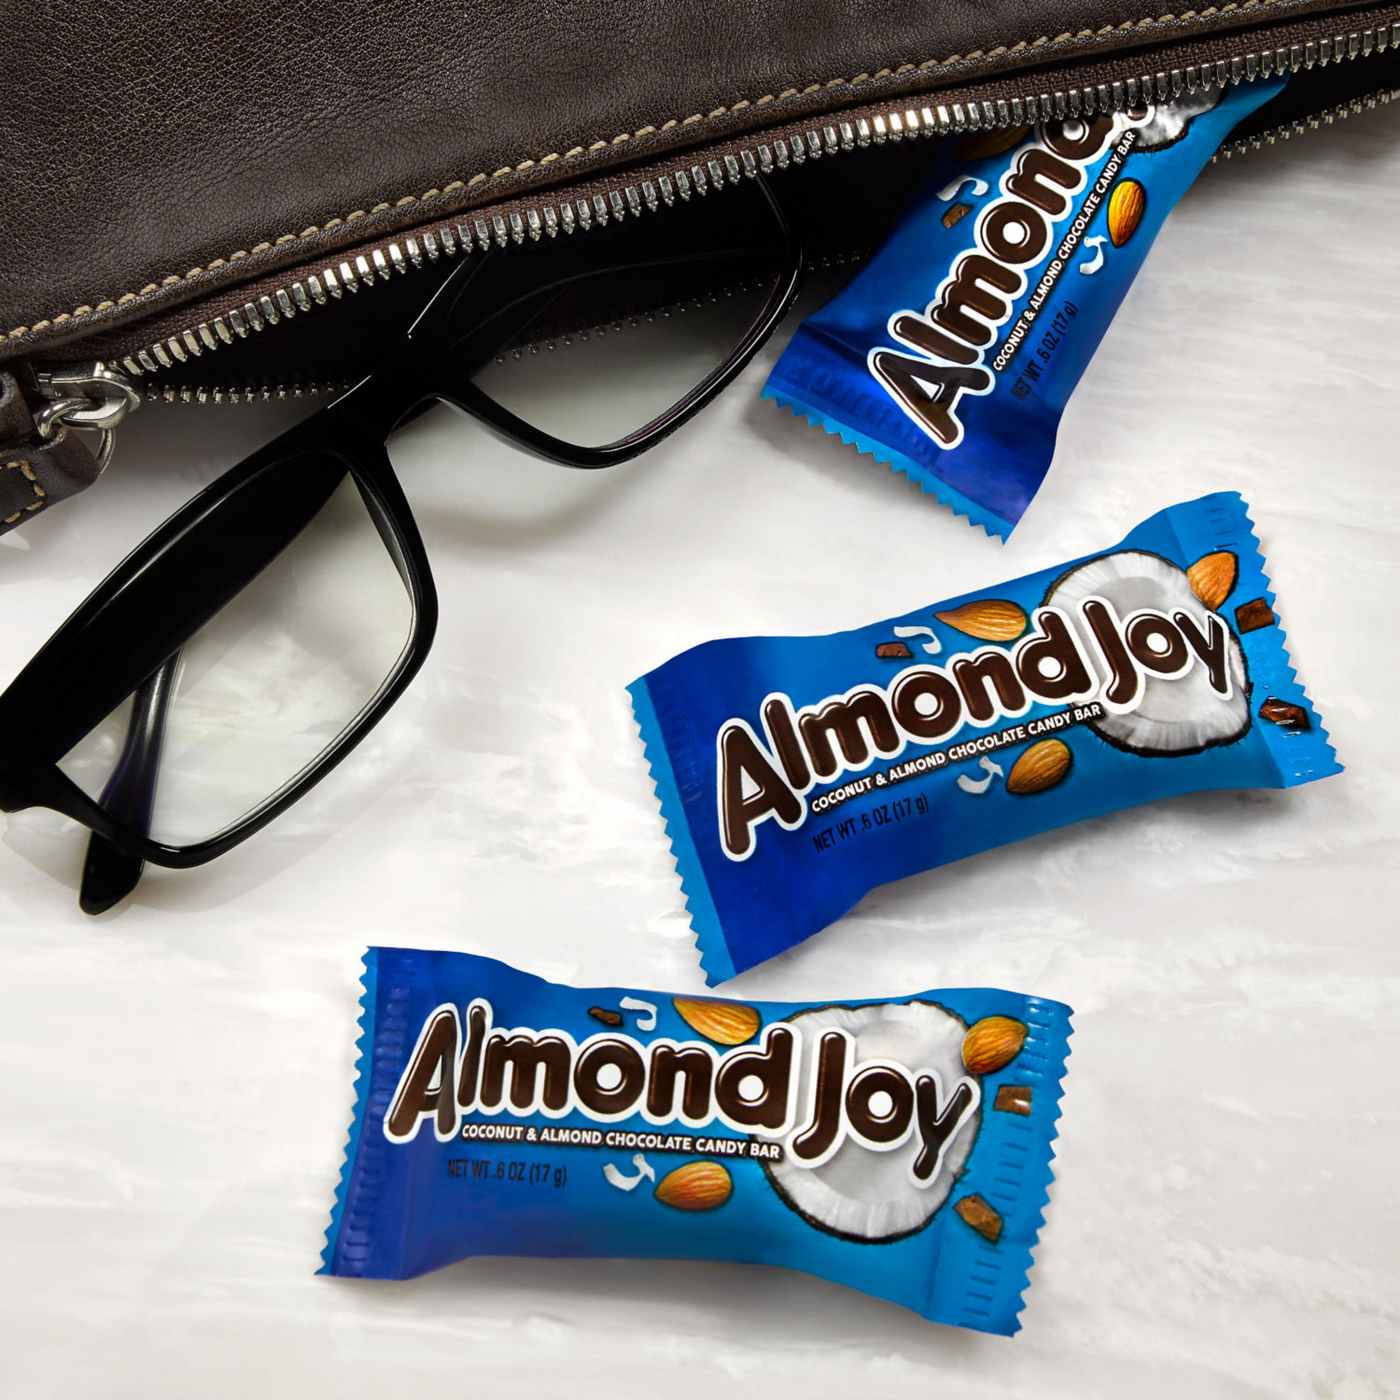 Almond Joy Coconut & Almond Chocolate Snack Size Candy Bars; image 7 of 7